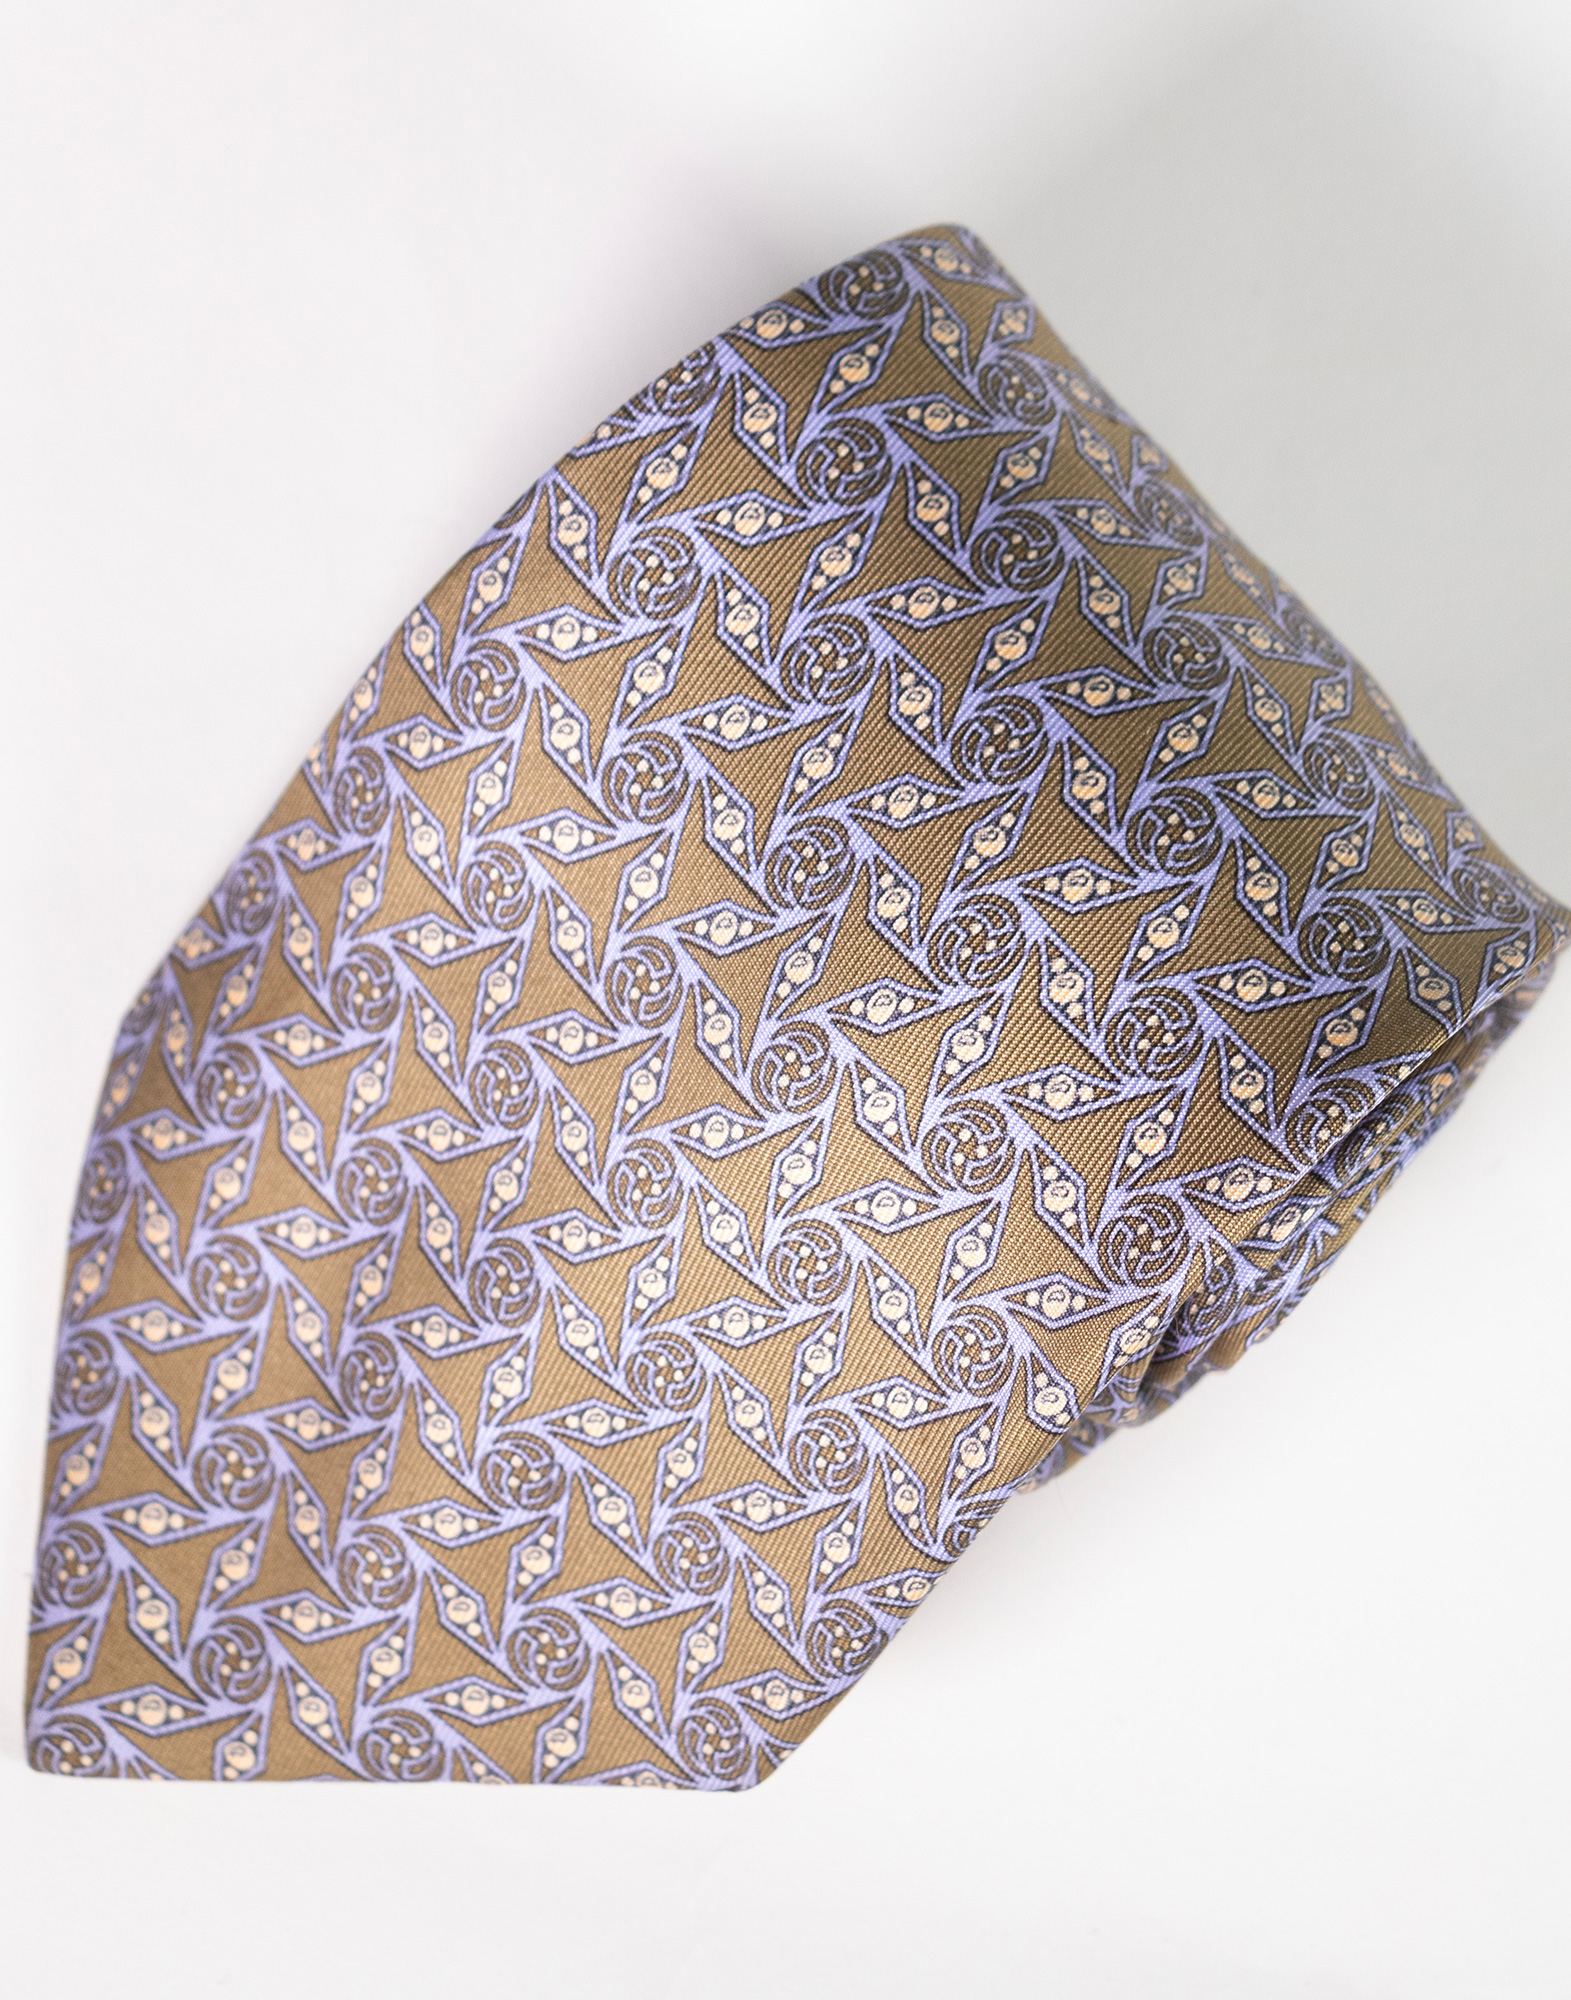 Hermes - Green and light blue tie with pattern